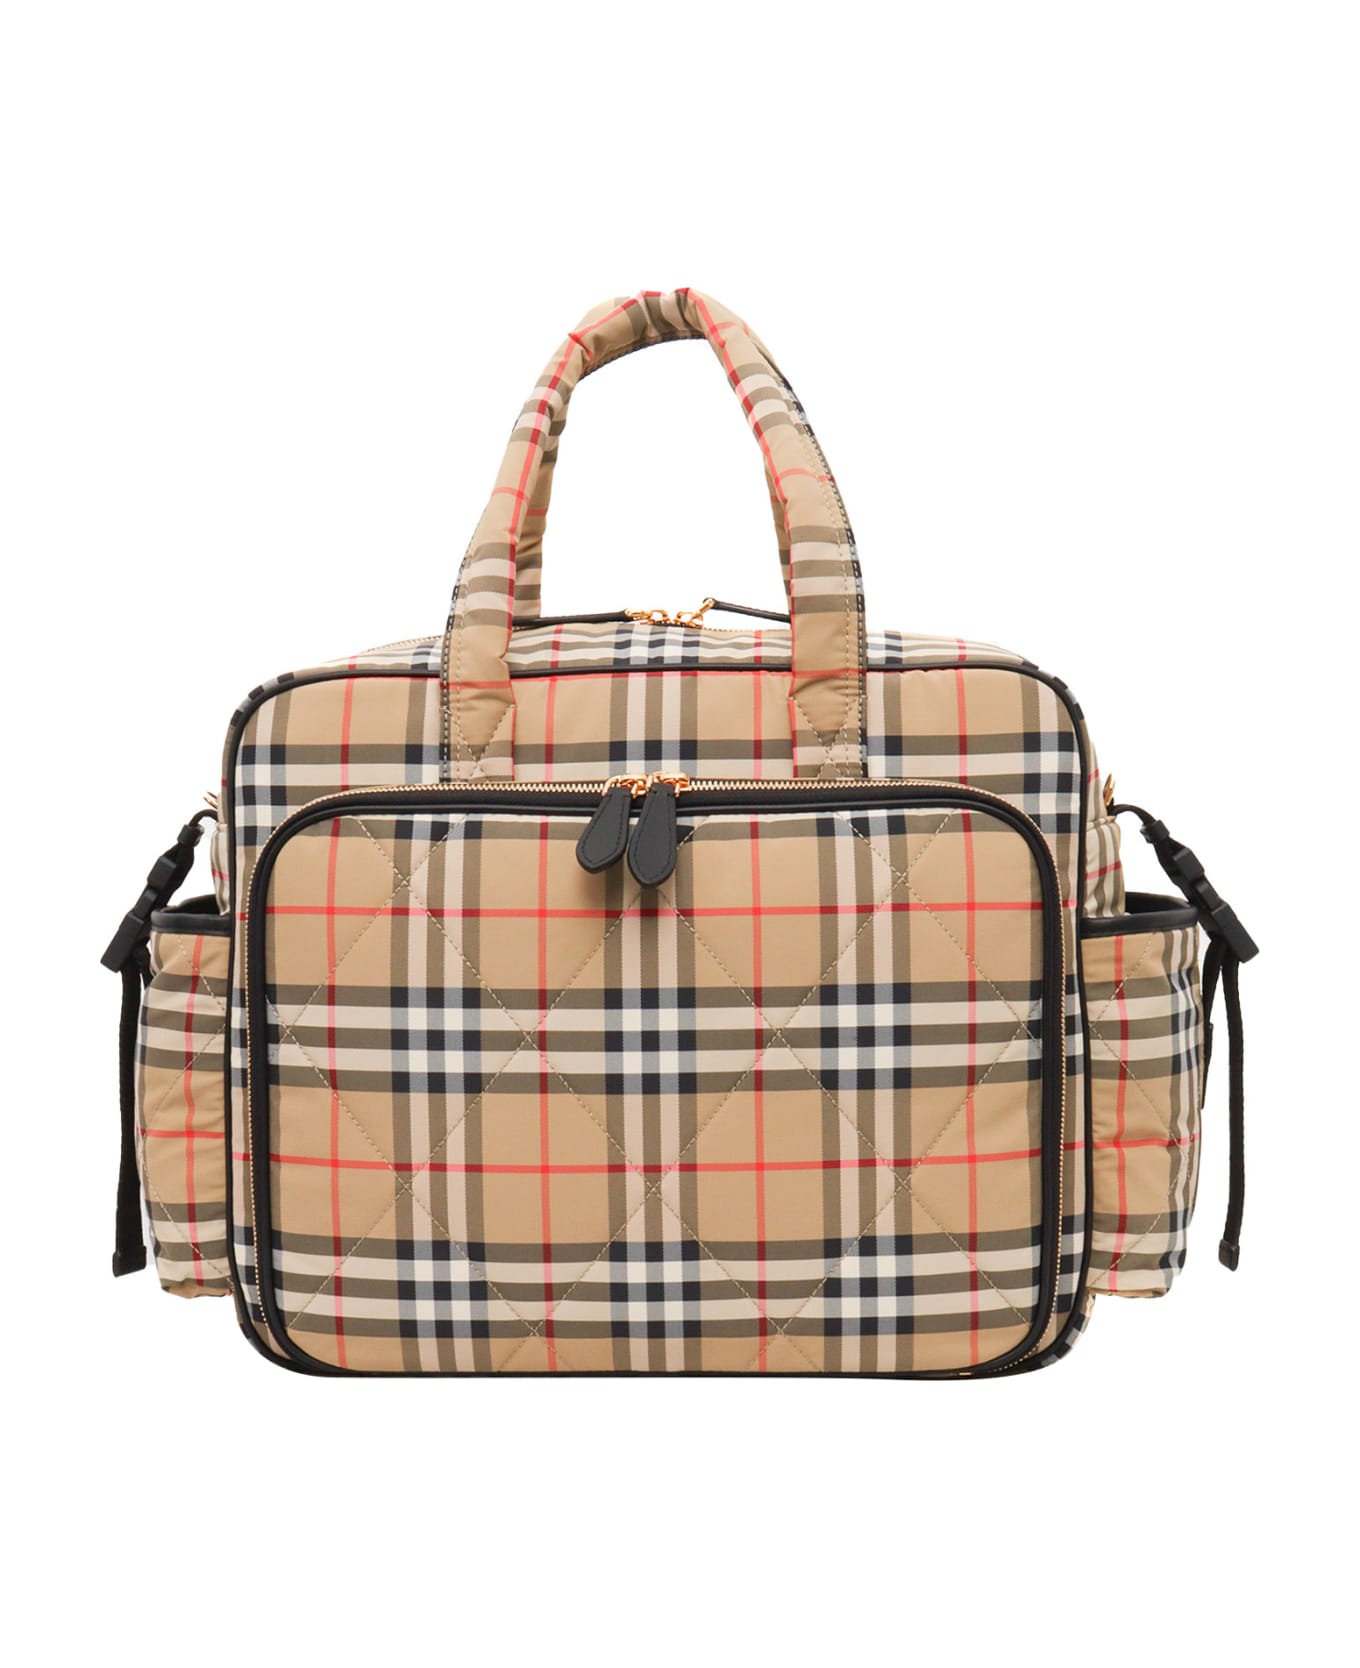 Burberry Check Pattern Bag - BEIGE アクセサリー＆ギフト